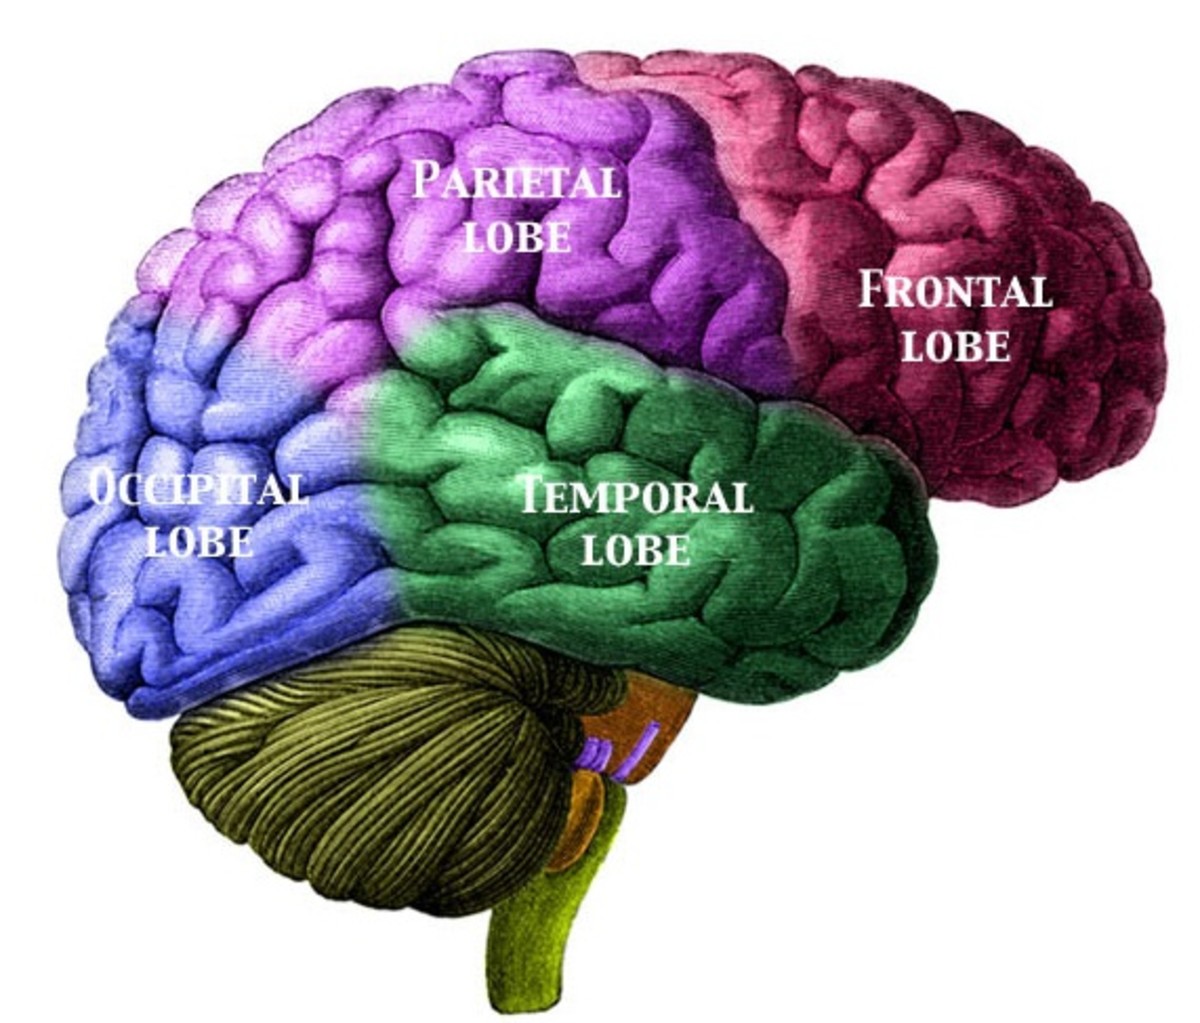 Right side of brain from Manuel de L'Anatomiste Morel and Duval 1883